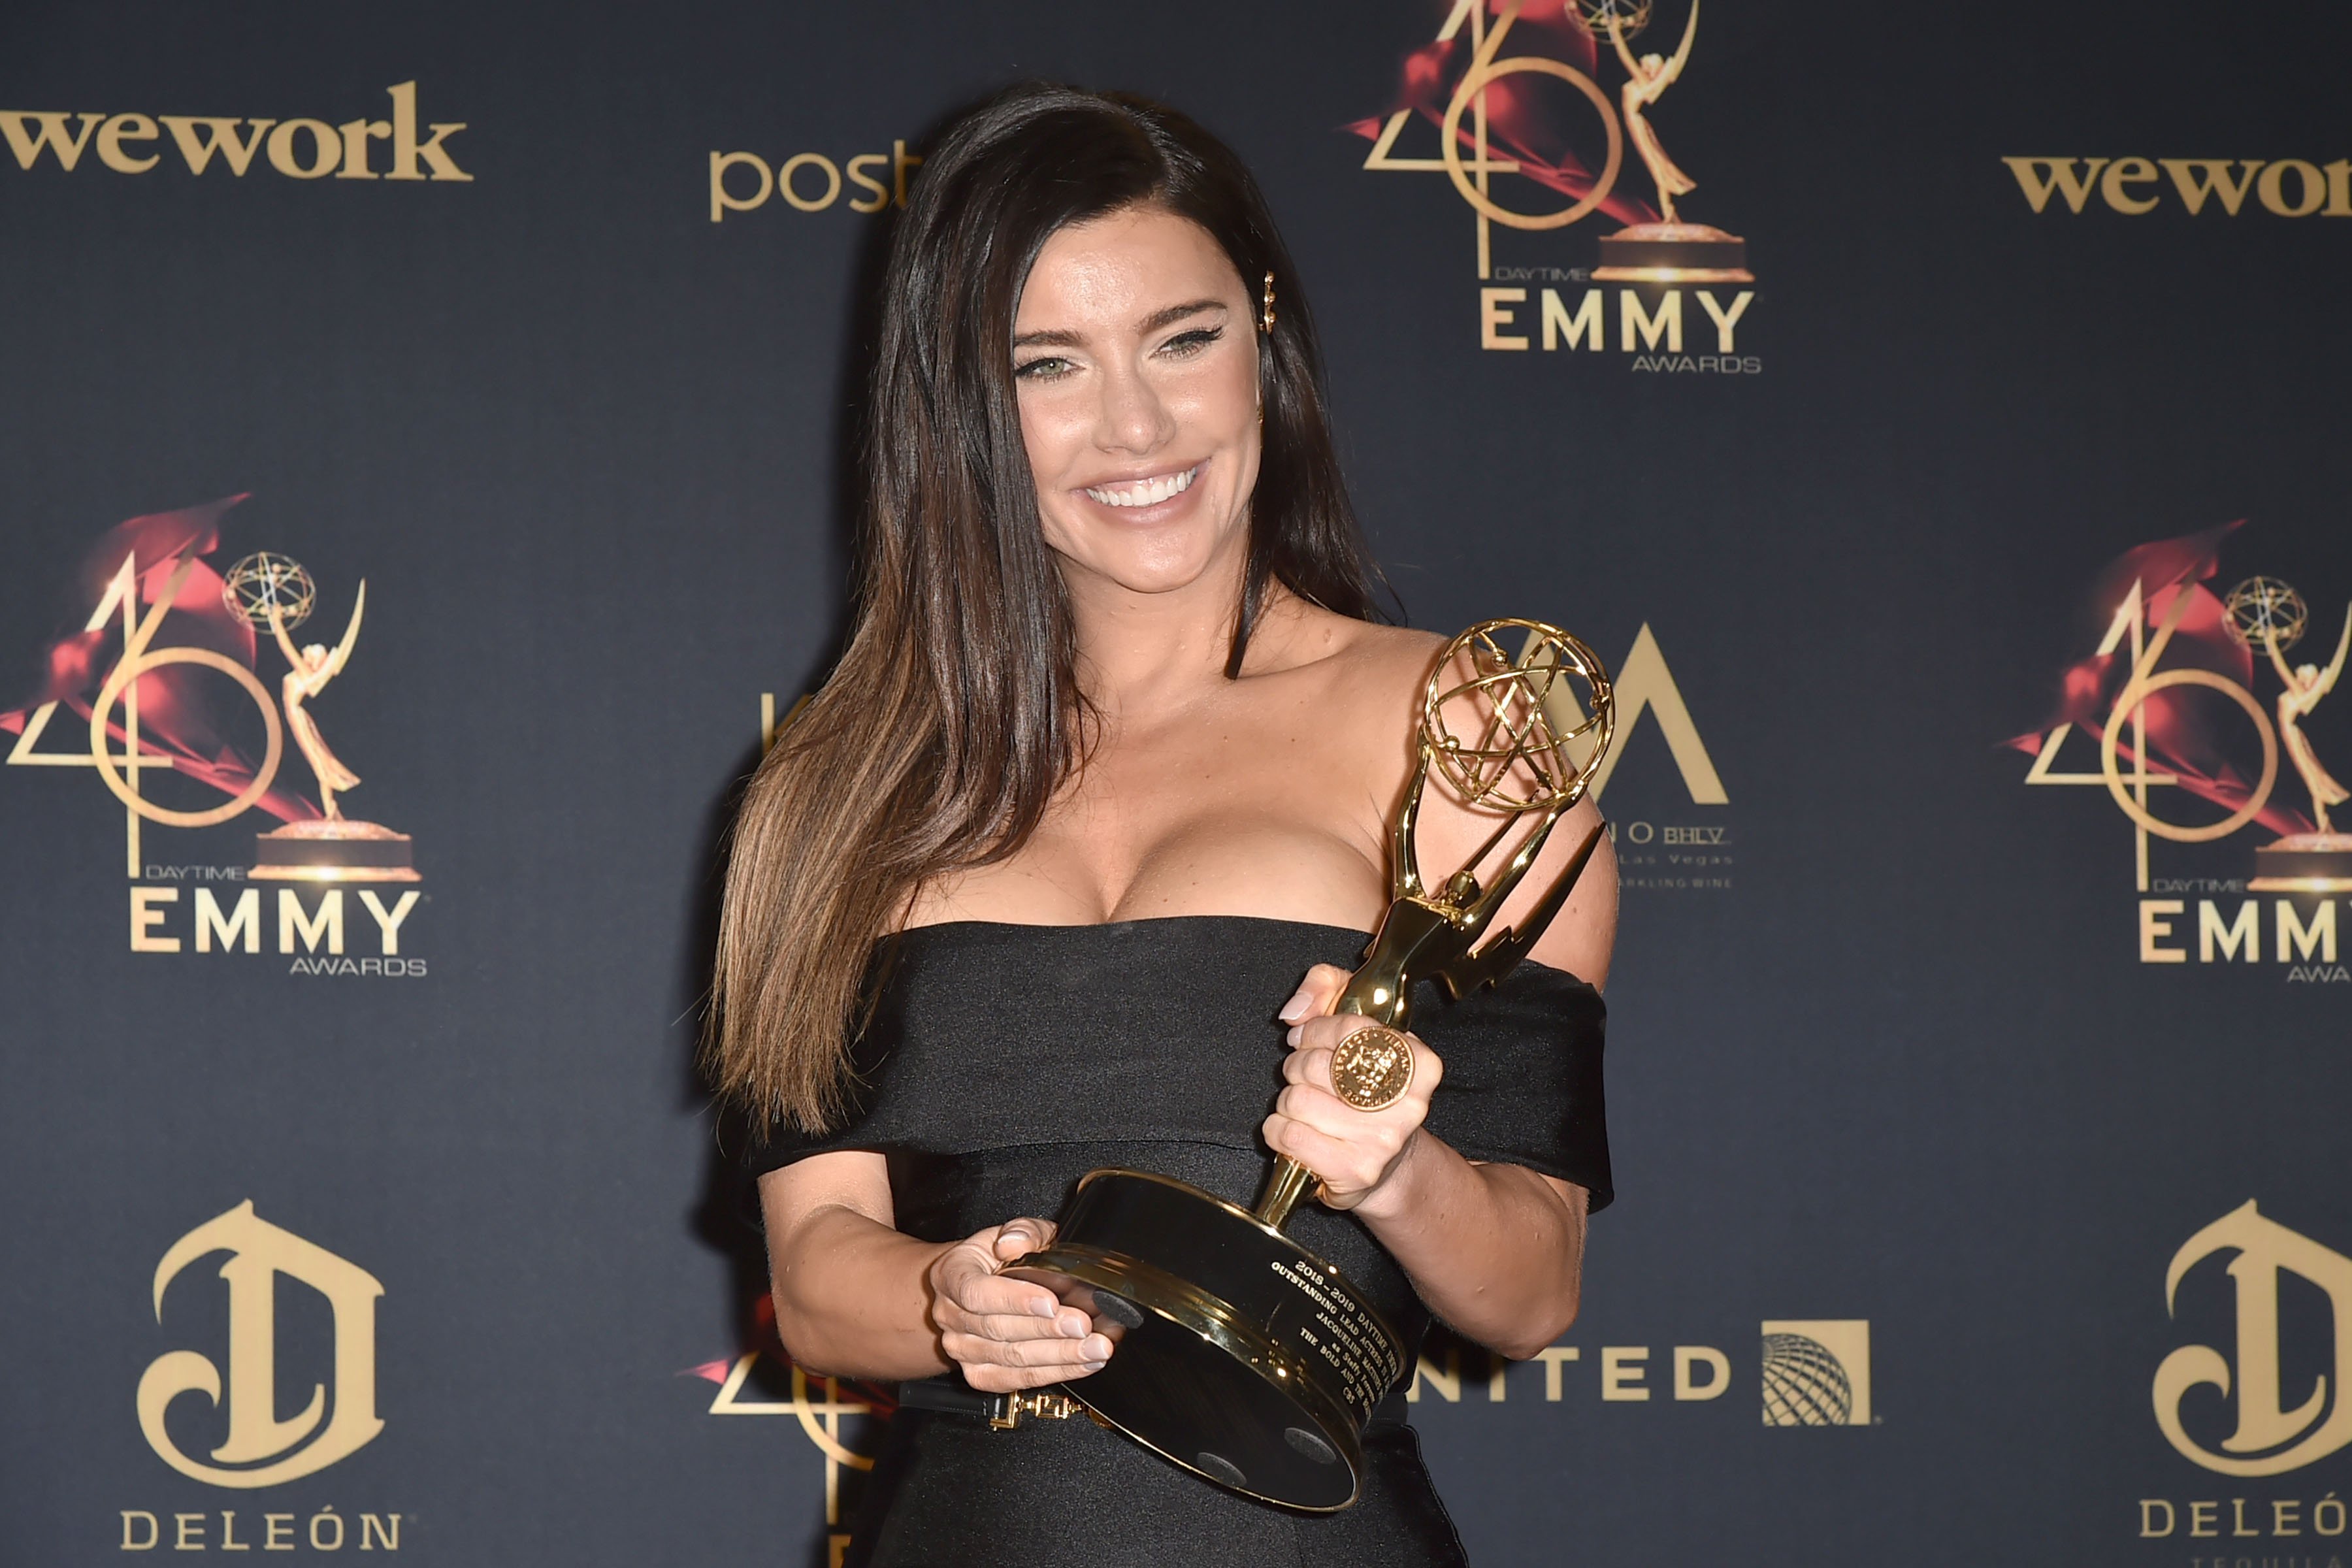 'The Bold and the Beautiful' actor Jacqueline MacInnes Wood wearing a black dress and holding an Emmy.